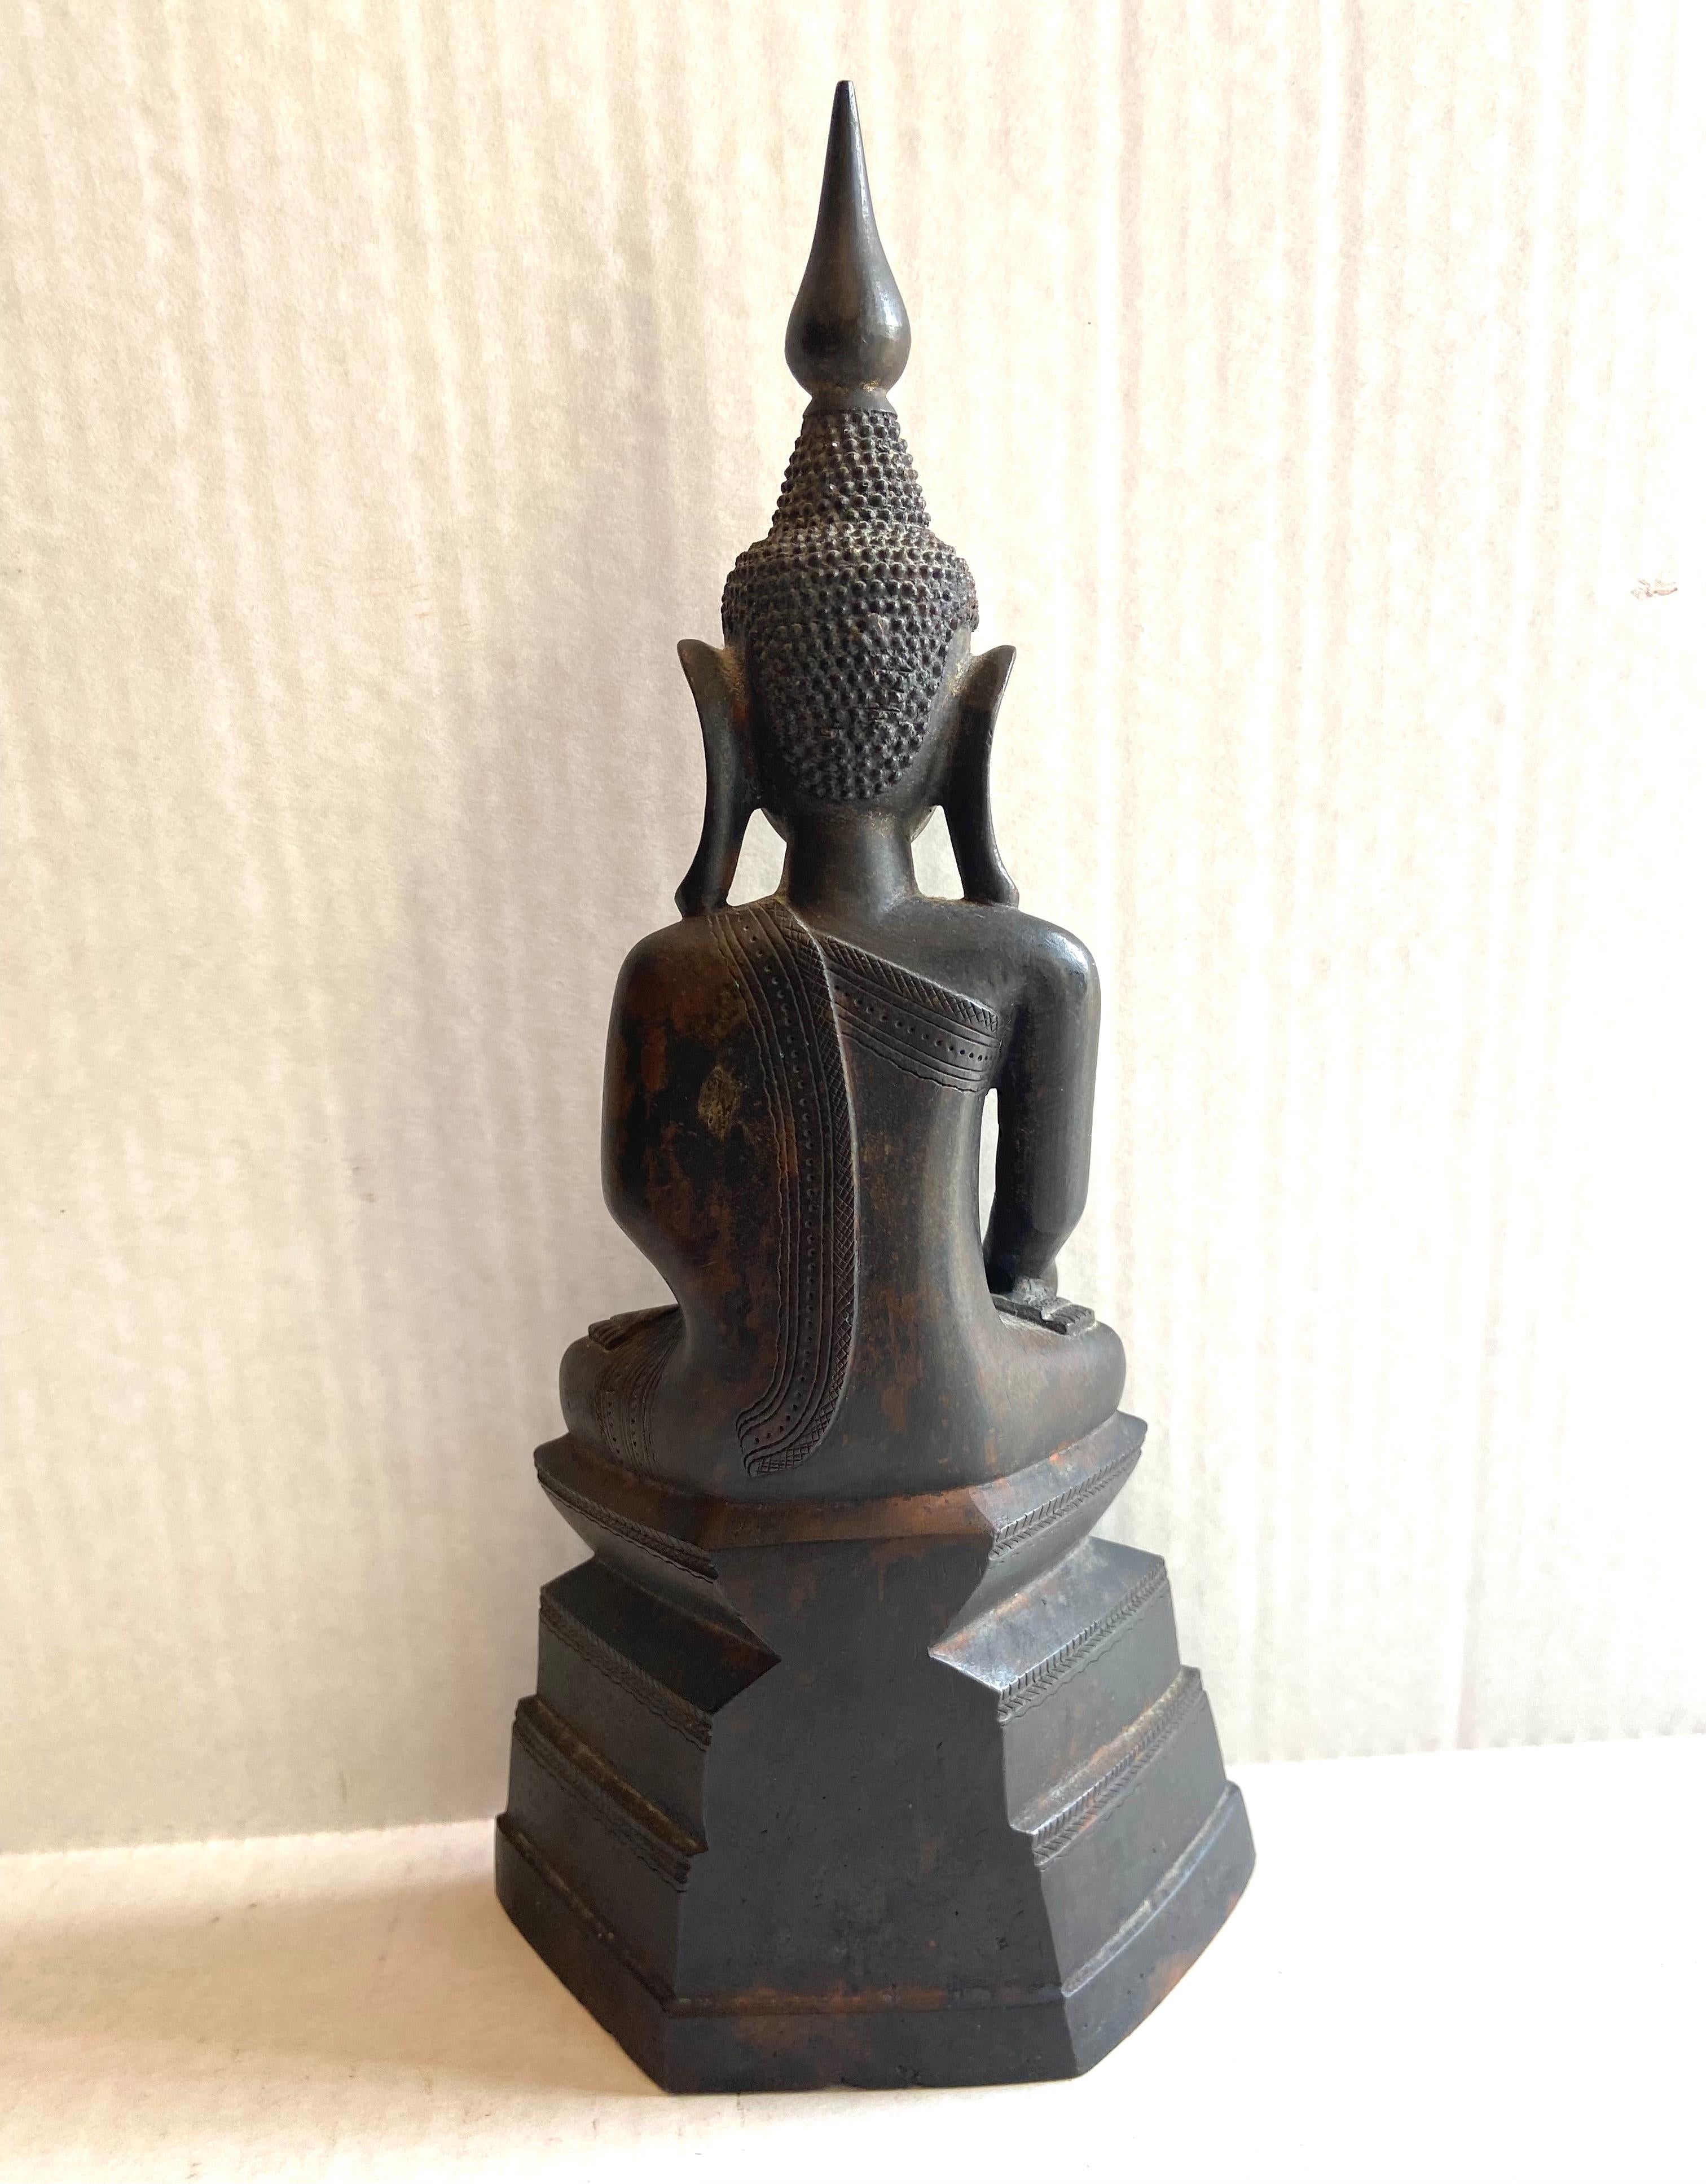 Burmese 18th Century Bronze Shan Buddha. This Buddha is placed in temples and at stupas as objects of commemoration and devotion. He holds his right hand downward in the earth-touching gesture (bhumisparsha mudra) with which he calls the earth